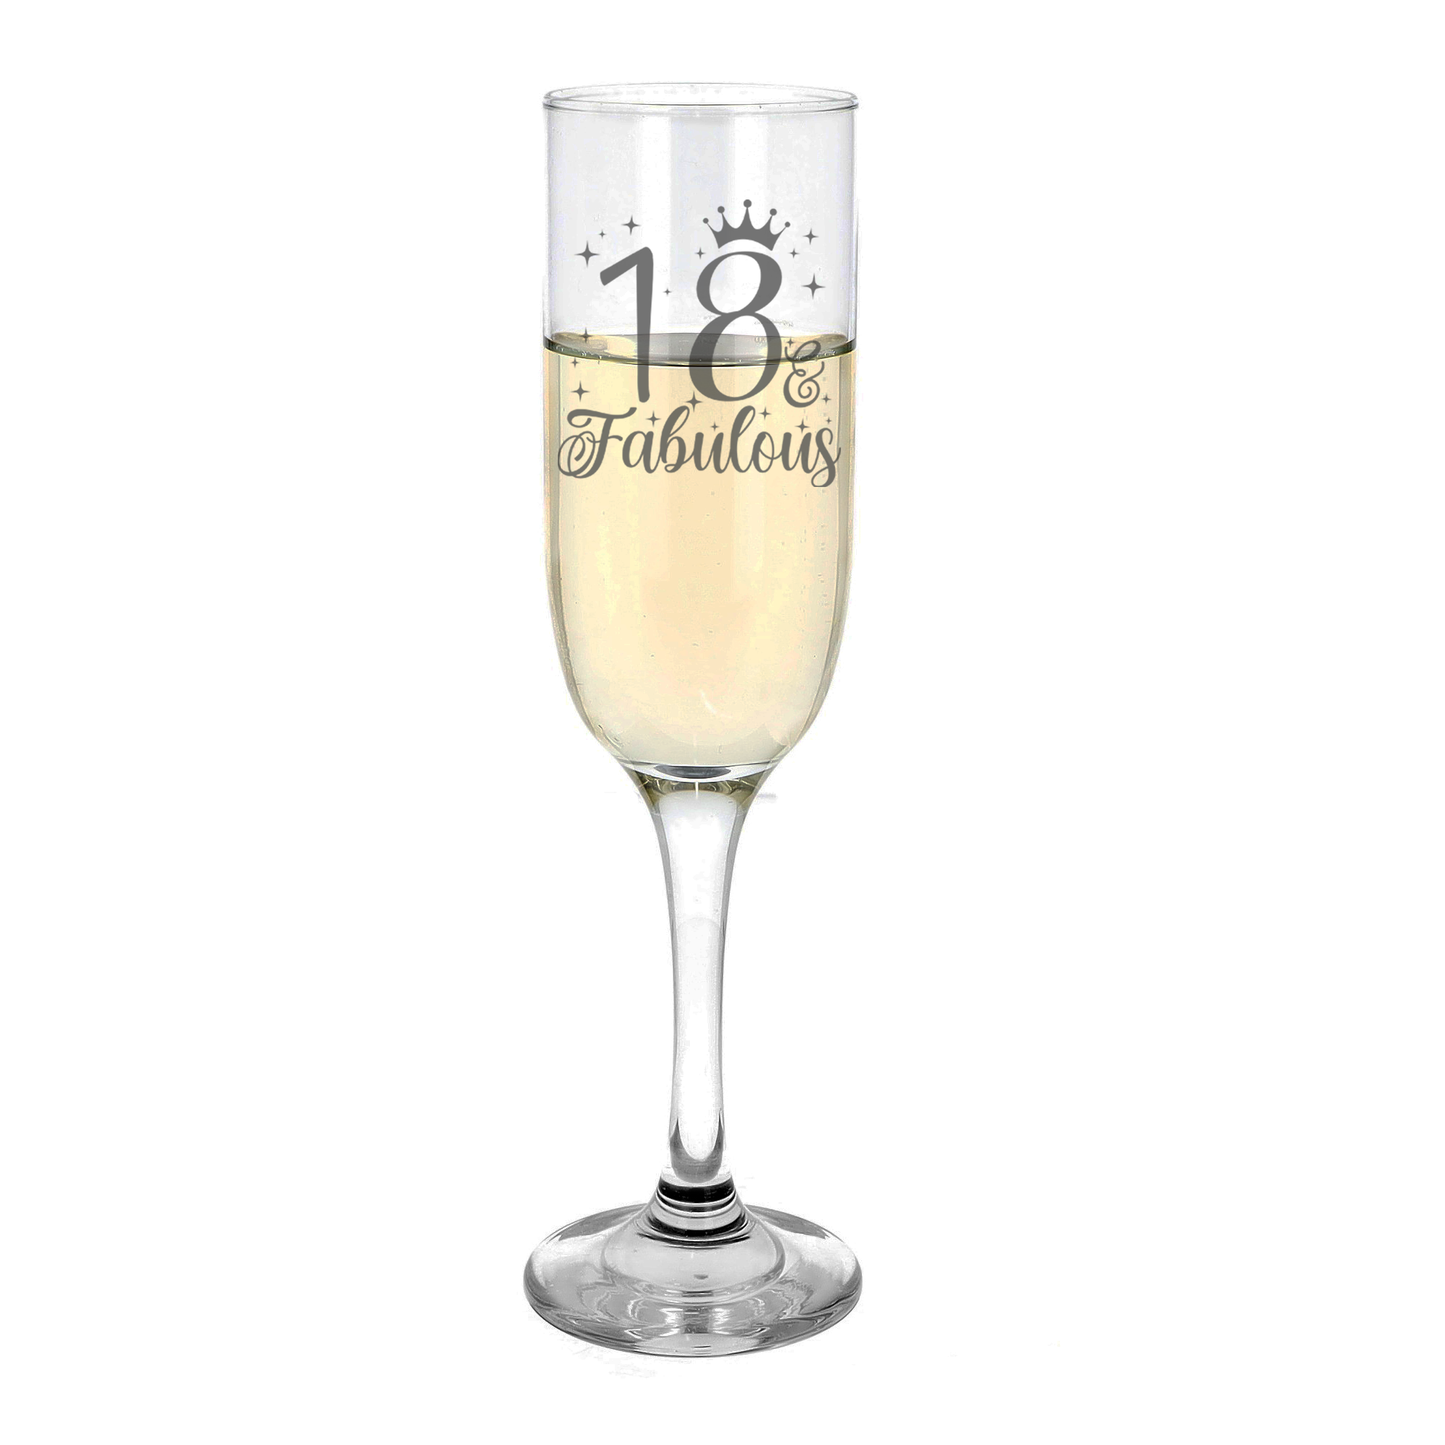 18 & Fabulous Engraved Champagne Glass and/or Coaster Set  - Always Looking Good - Champagne Glass On Its Own  